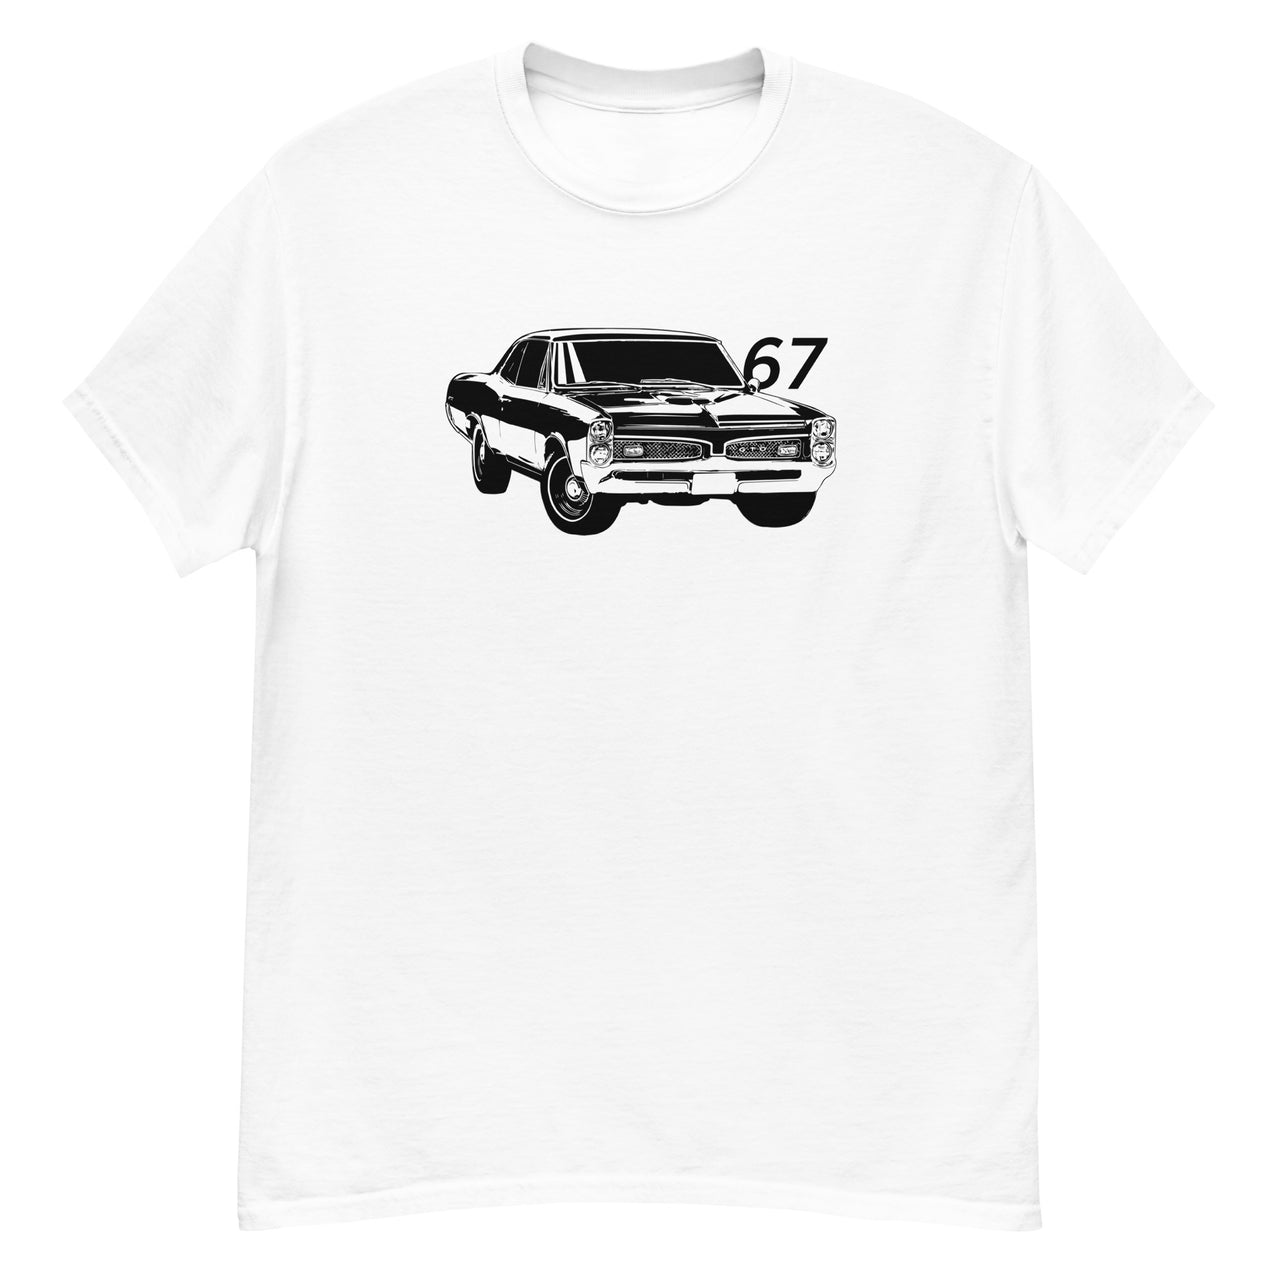 67 GTO T-Shirt, 60s Muscle Car Tee Shirt-In-White-From Aggressive Thread